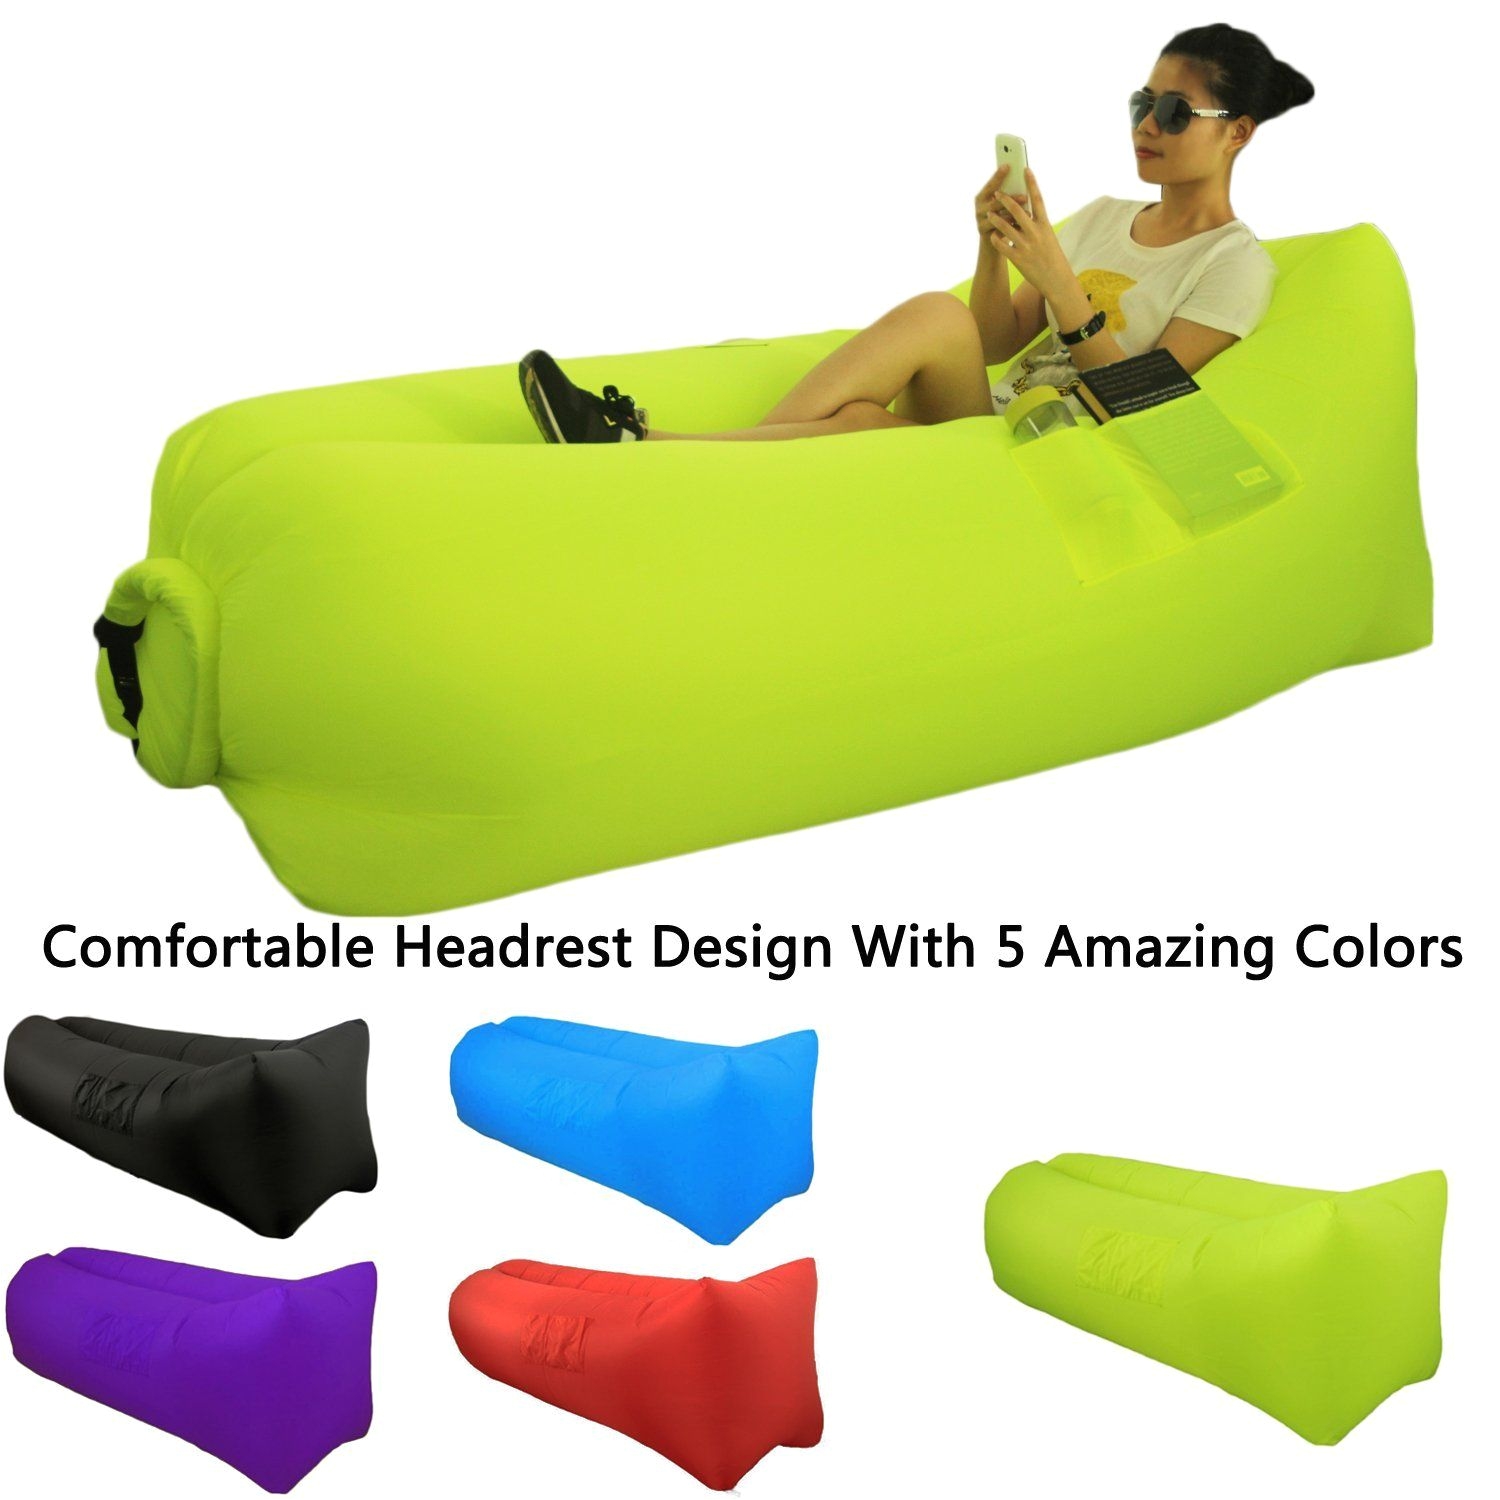 Beach Blow Up Chairs Camping Accessories Great Home Inflatable Lounger sofa Air Sleeping